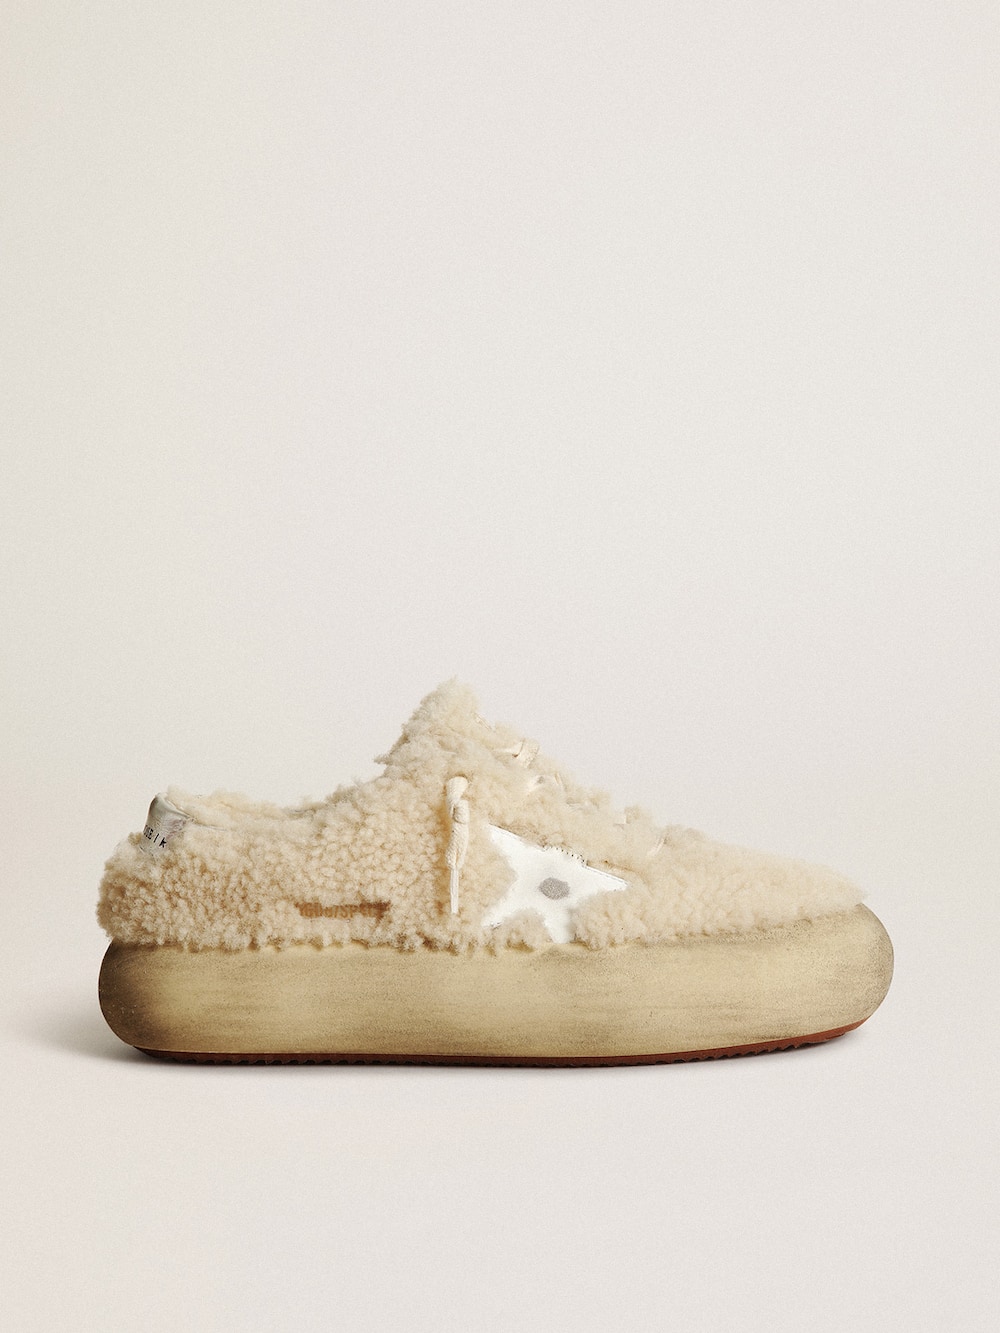 Golden Goose - Women’s Space-Star shoes in beige shearling with white leather star and metallic leather heel tab in 